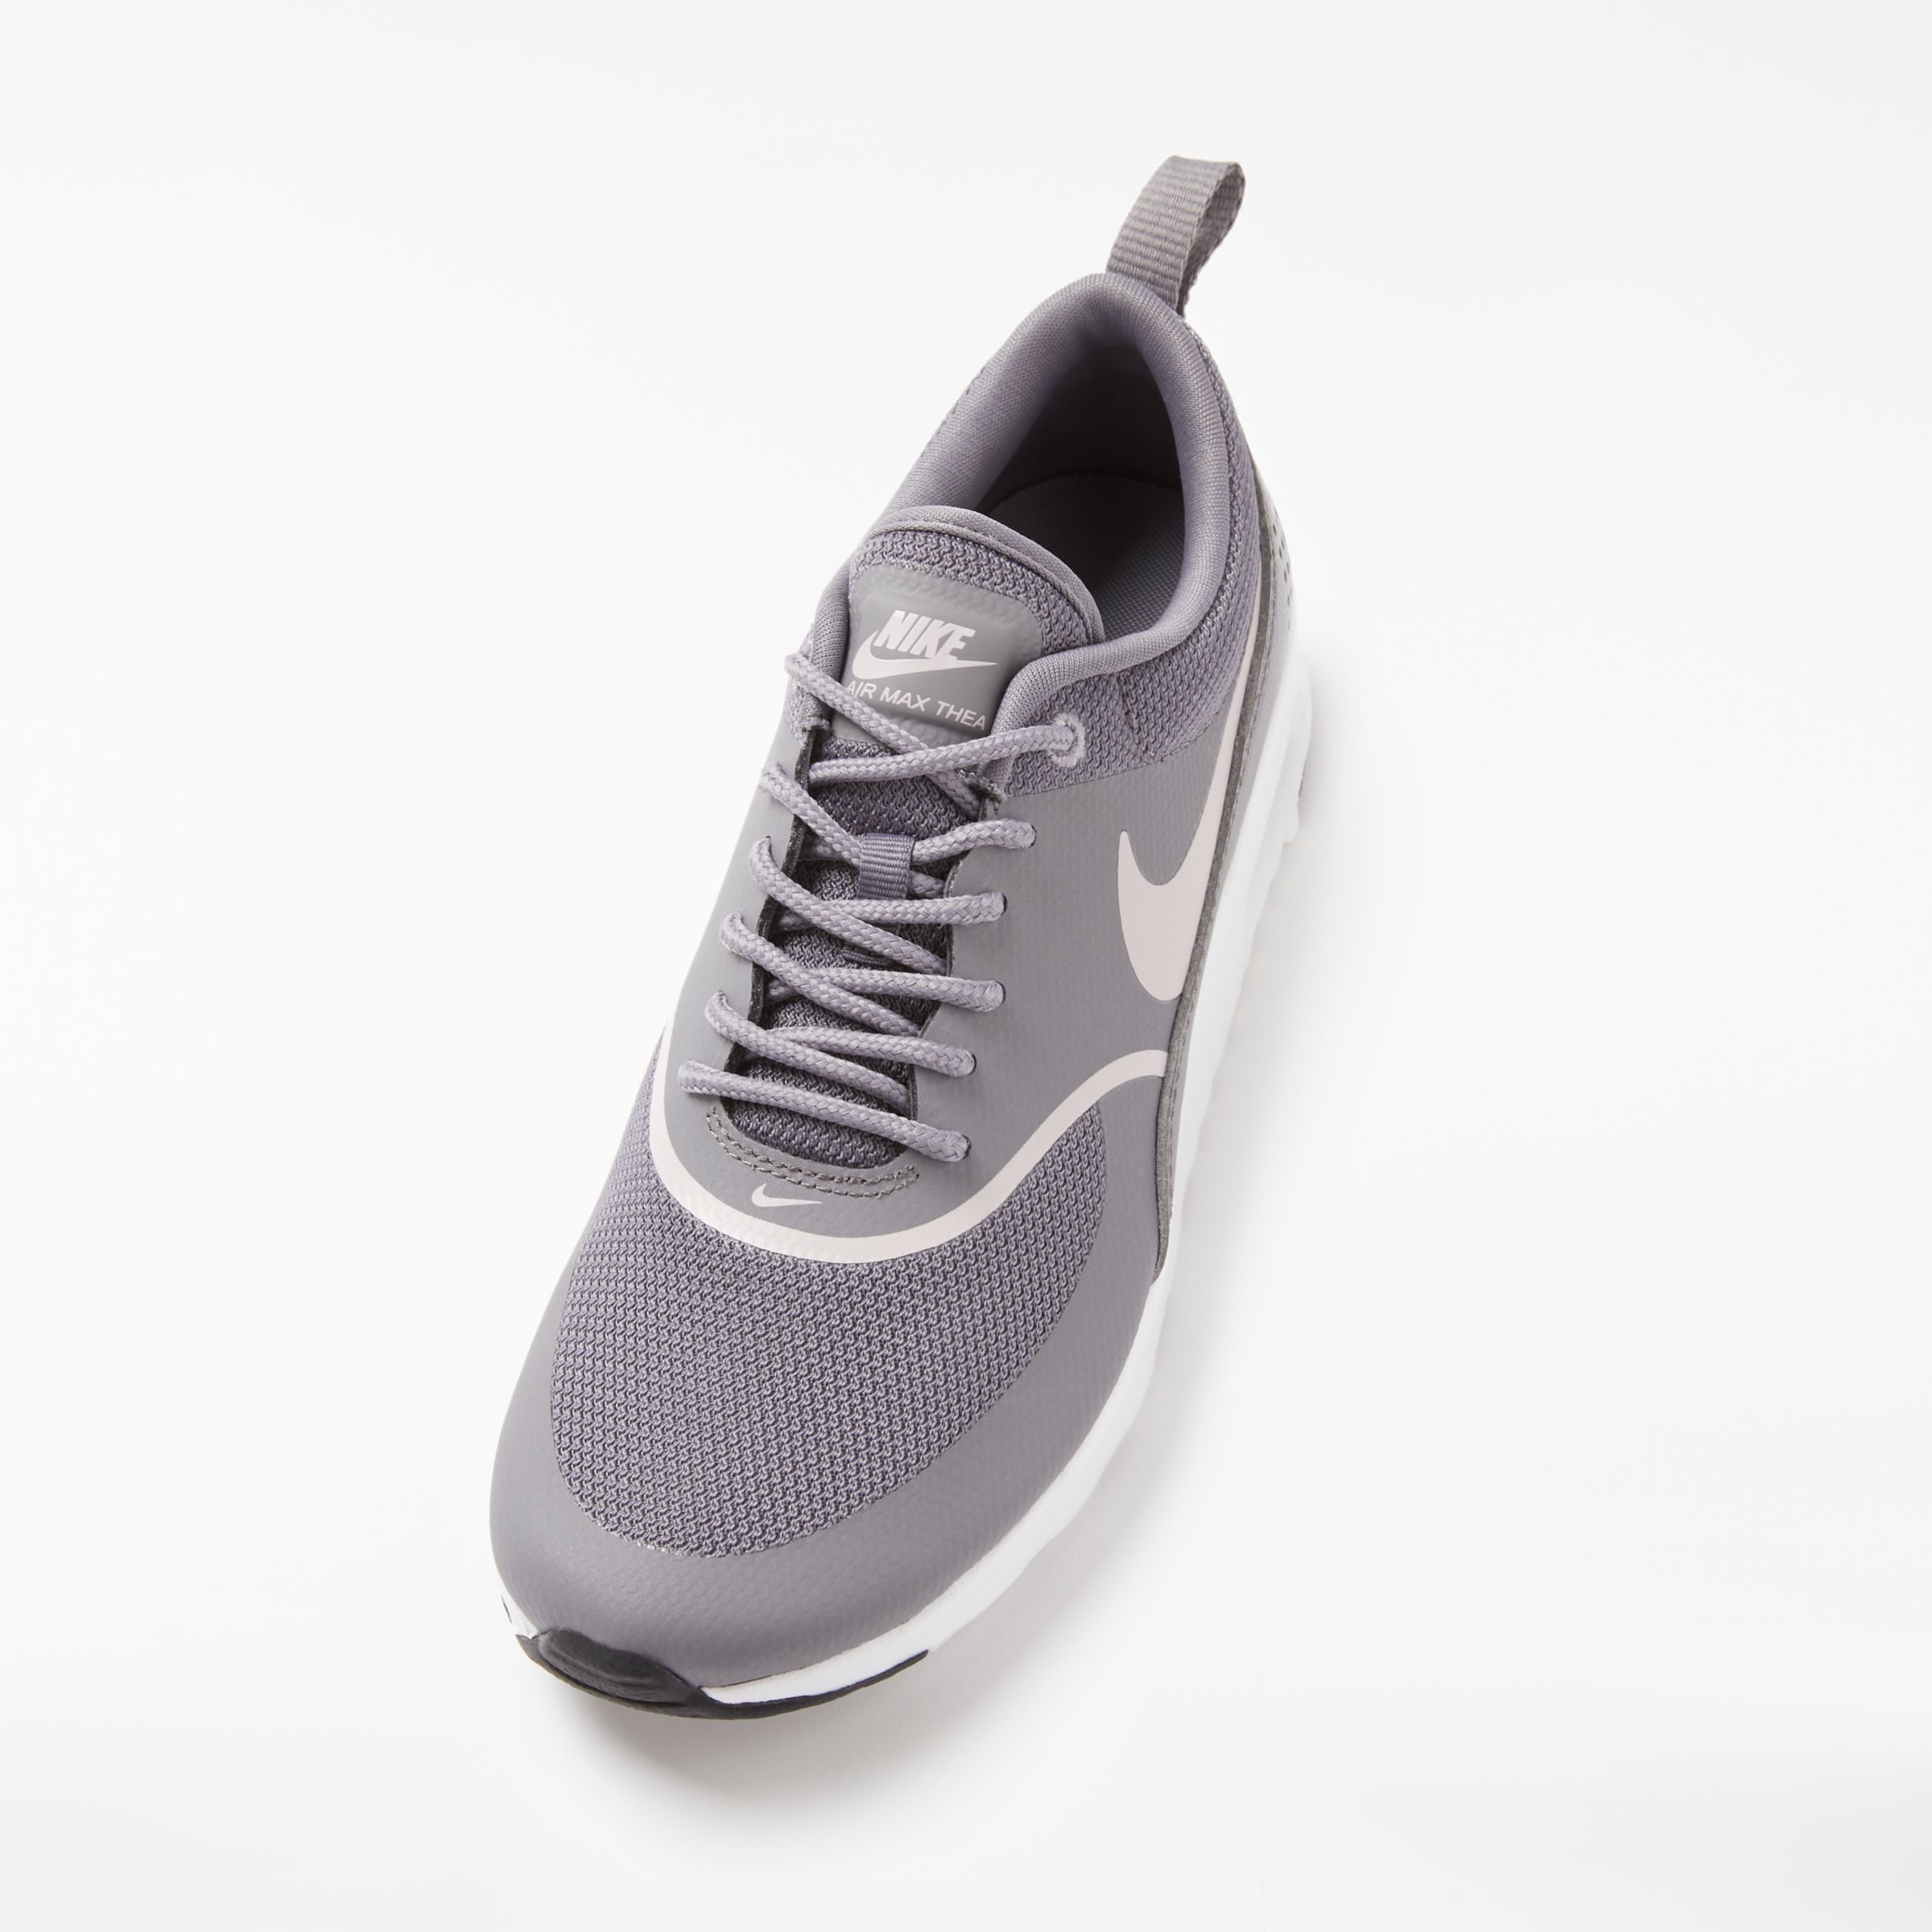 Nike Air Max Thea Women's Trainers at 